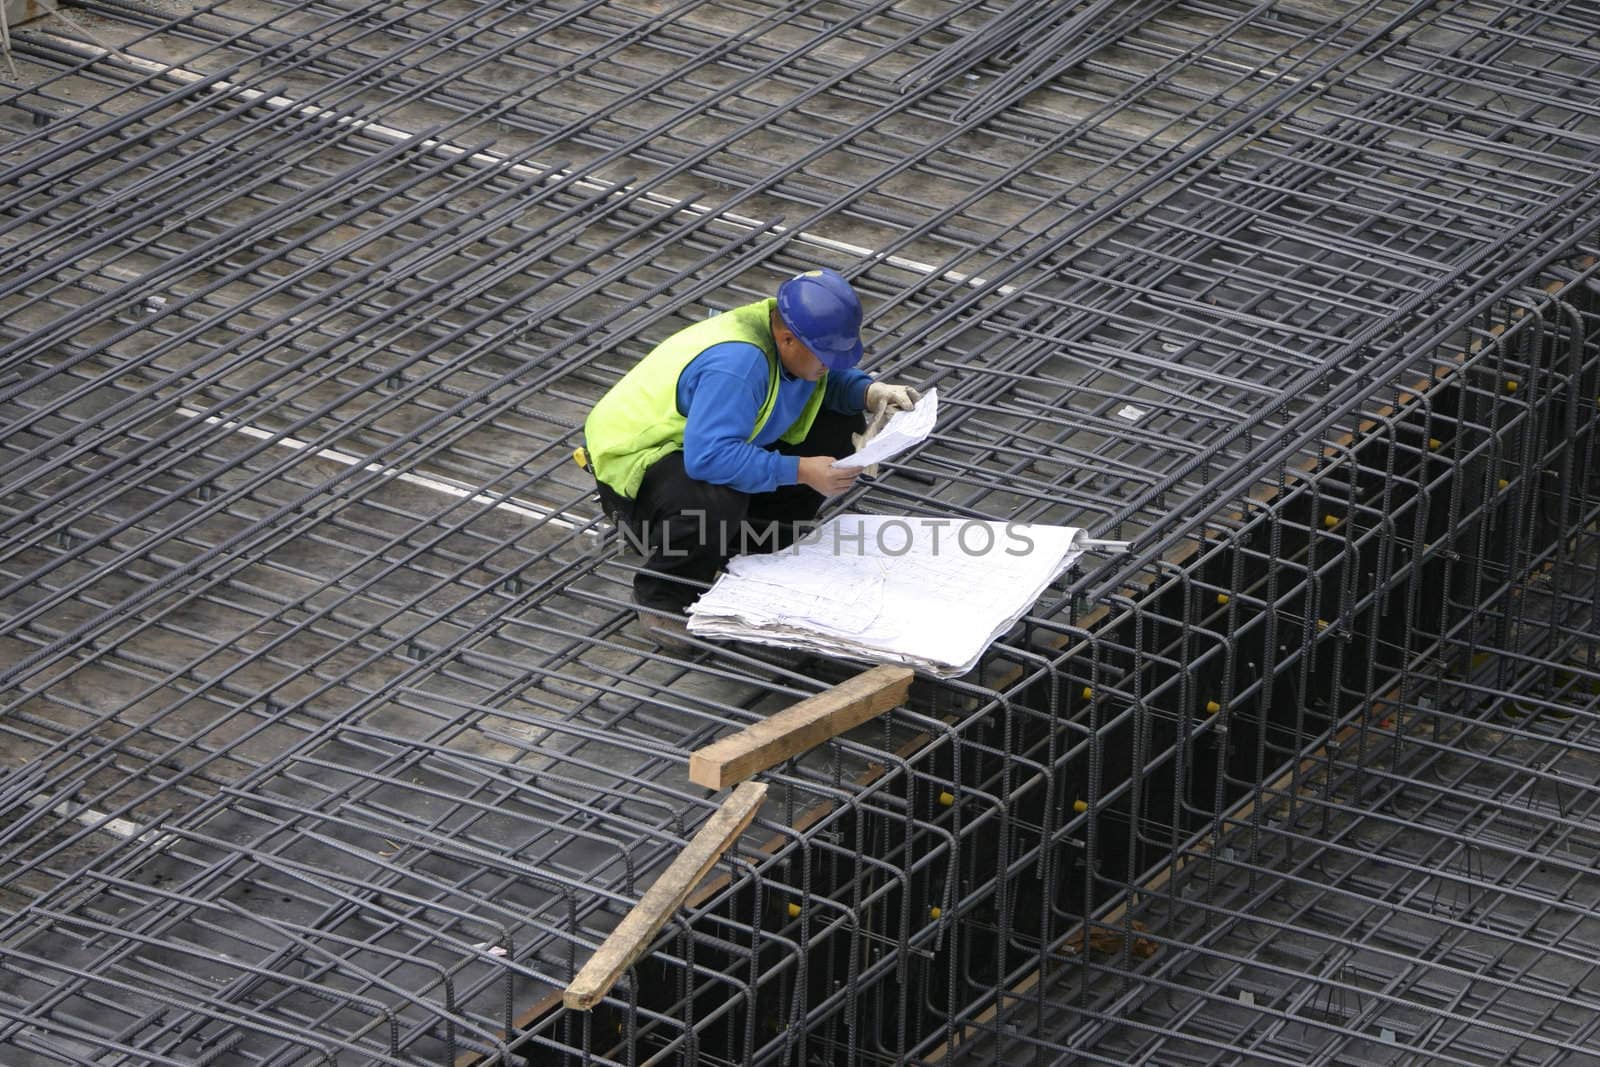 The site manager reads the building plans at a construction site.
